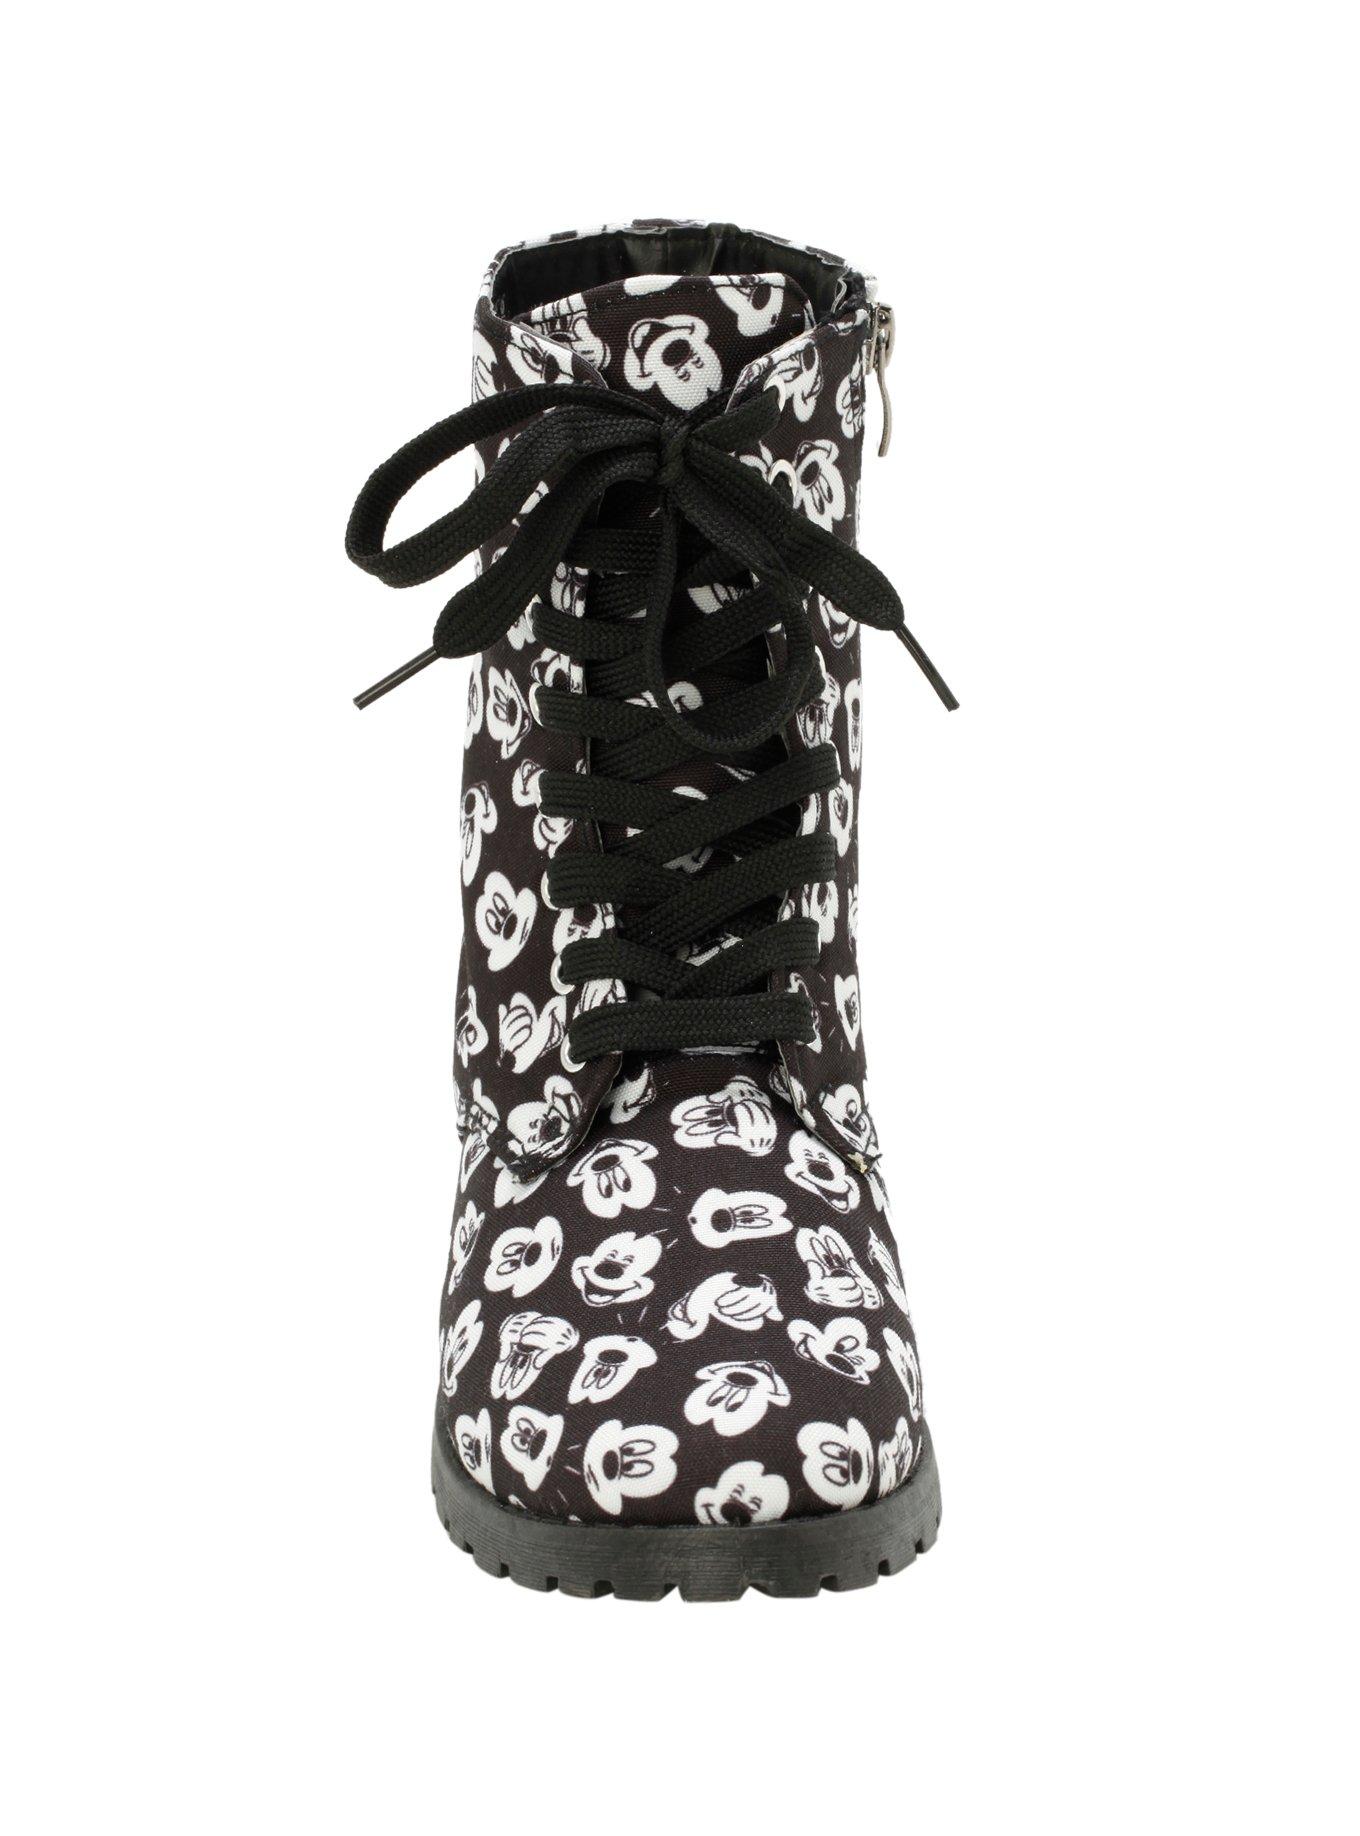 Disney Mickey Mouse Printed Boots, BLACK, alternate